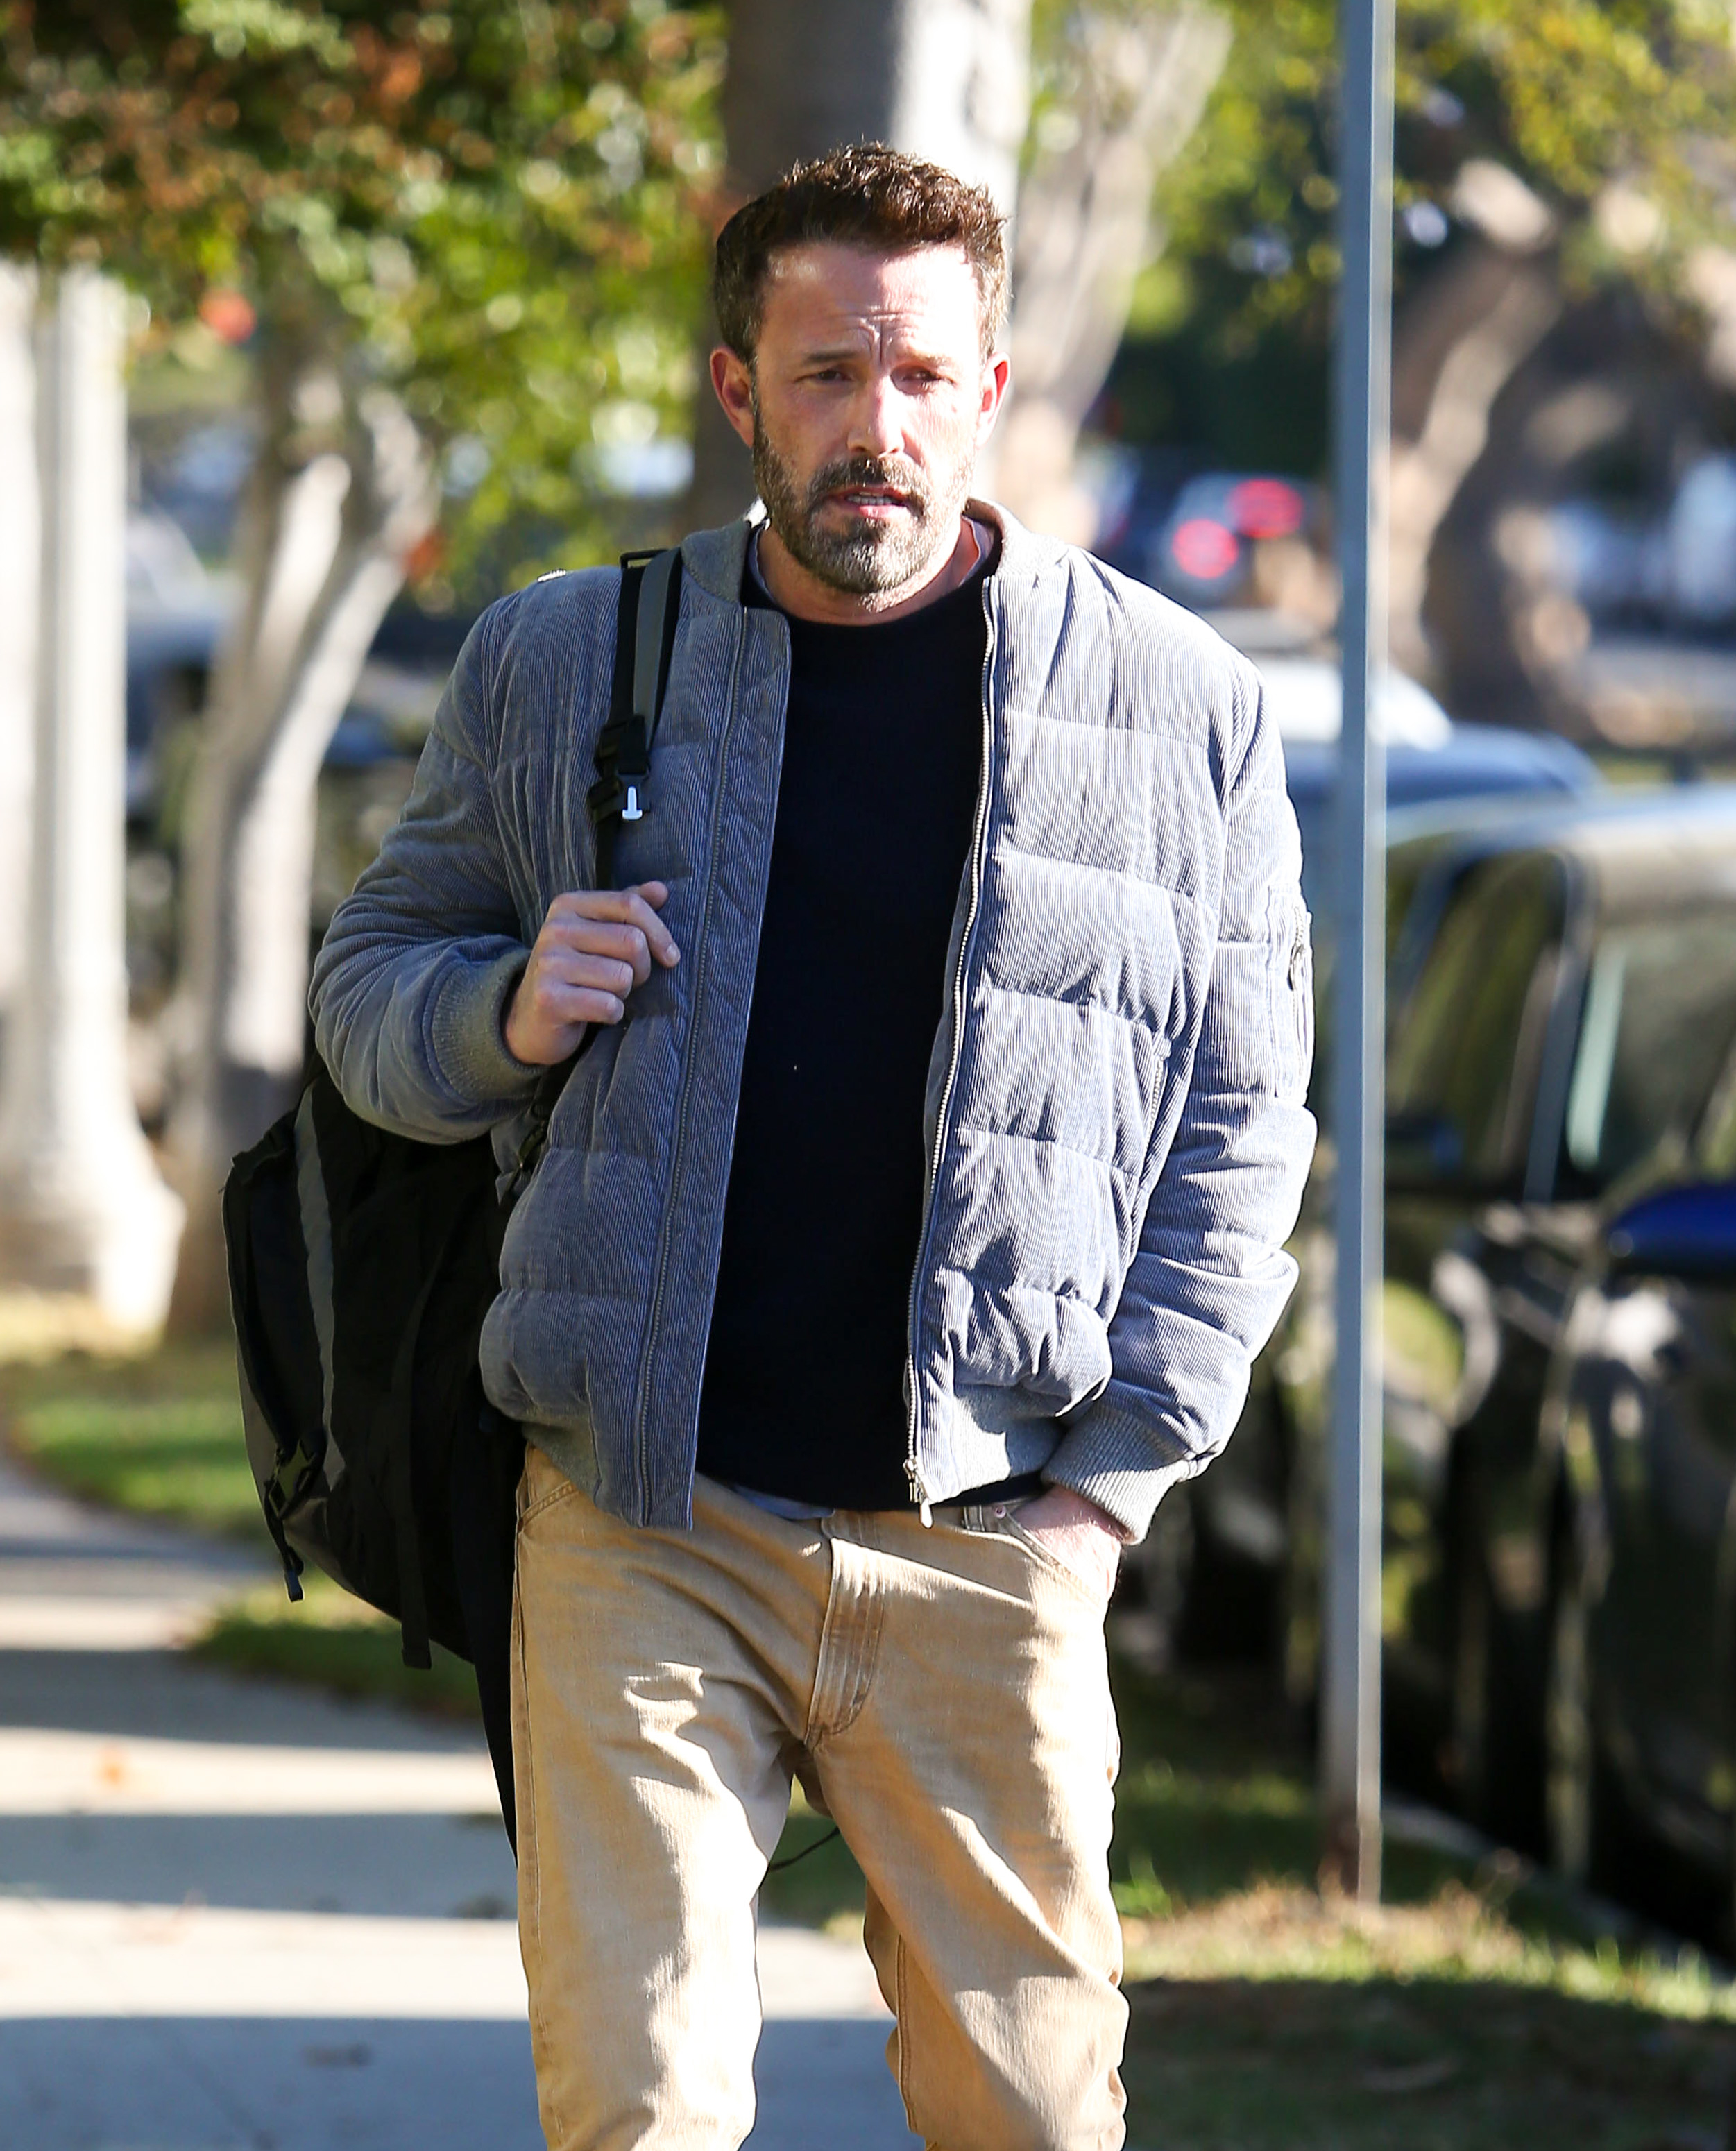 Ben in a casual attire with a jacket and backpack walking on a sidewalk